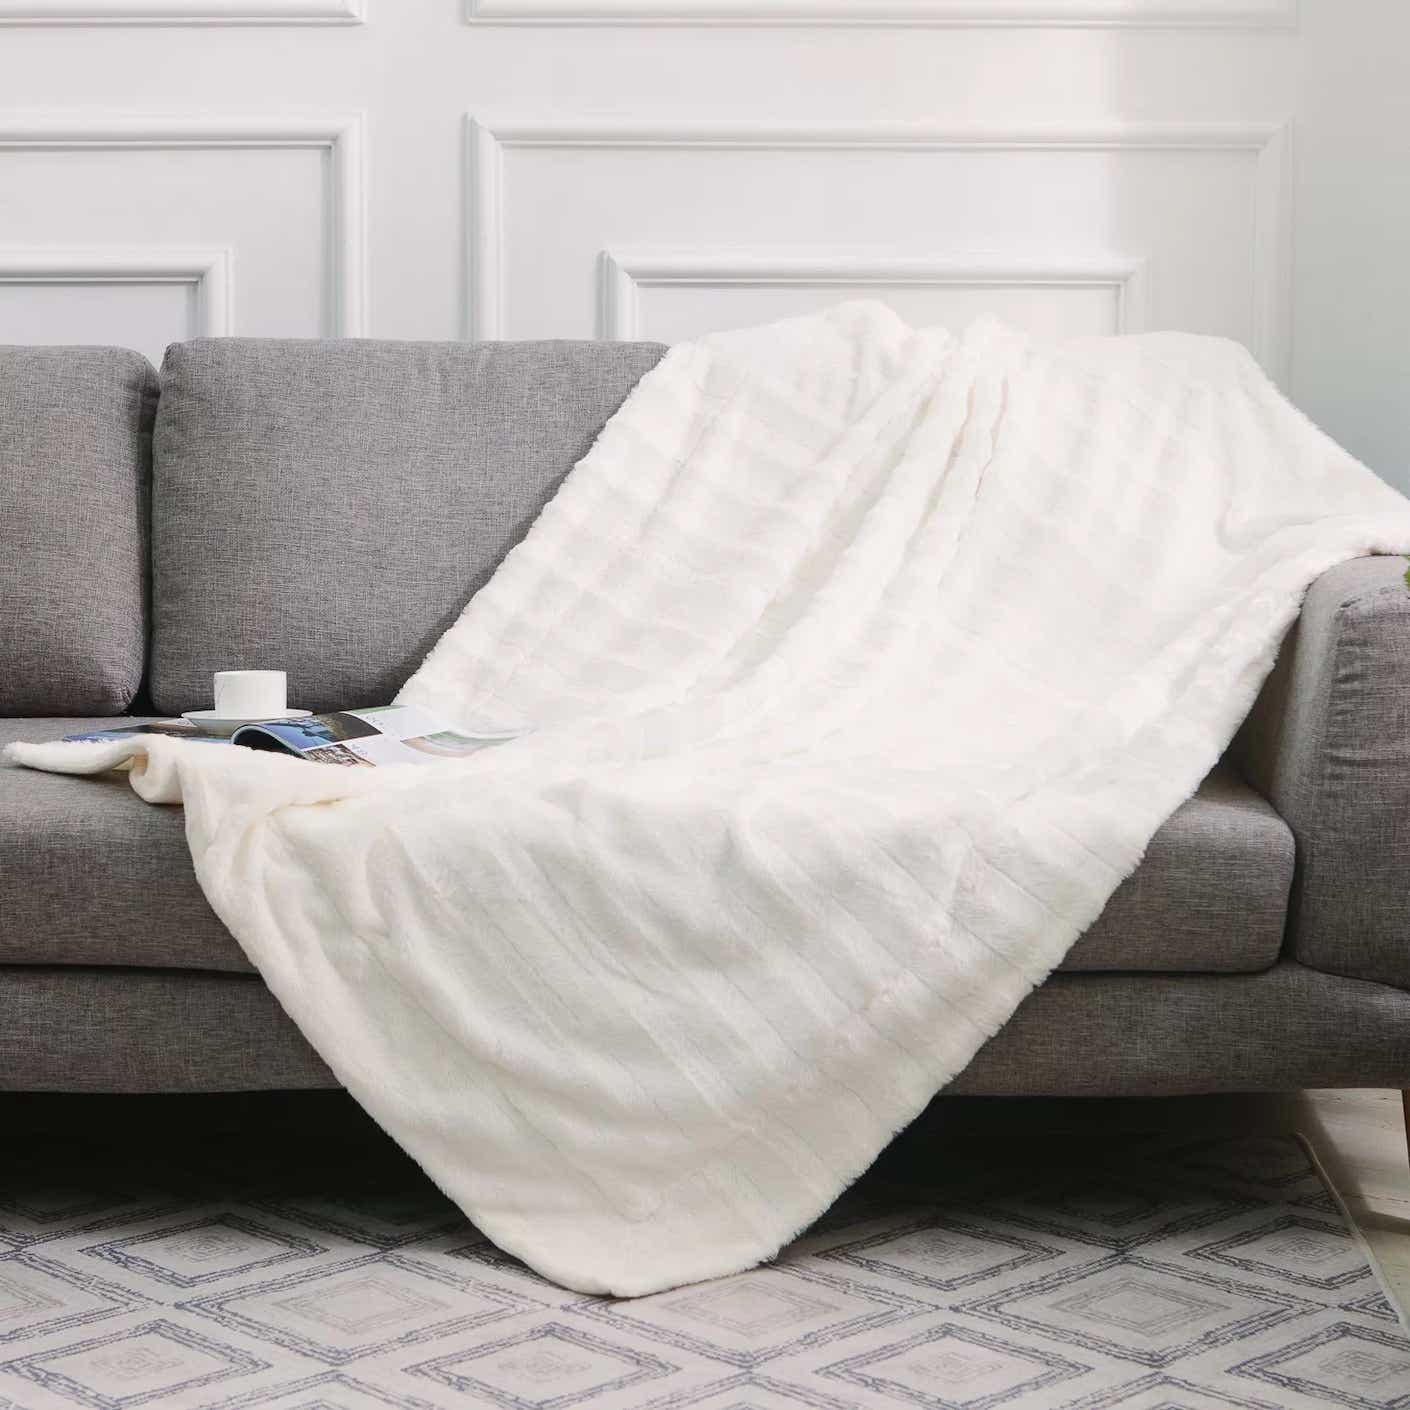 A soft, white, throw blanket is tossed across a grey couch.